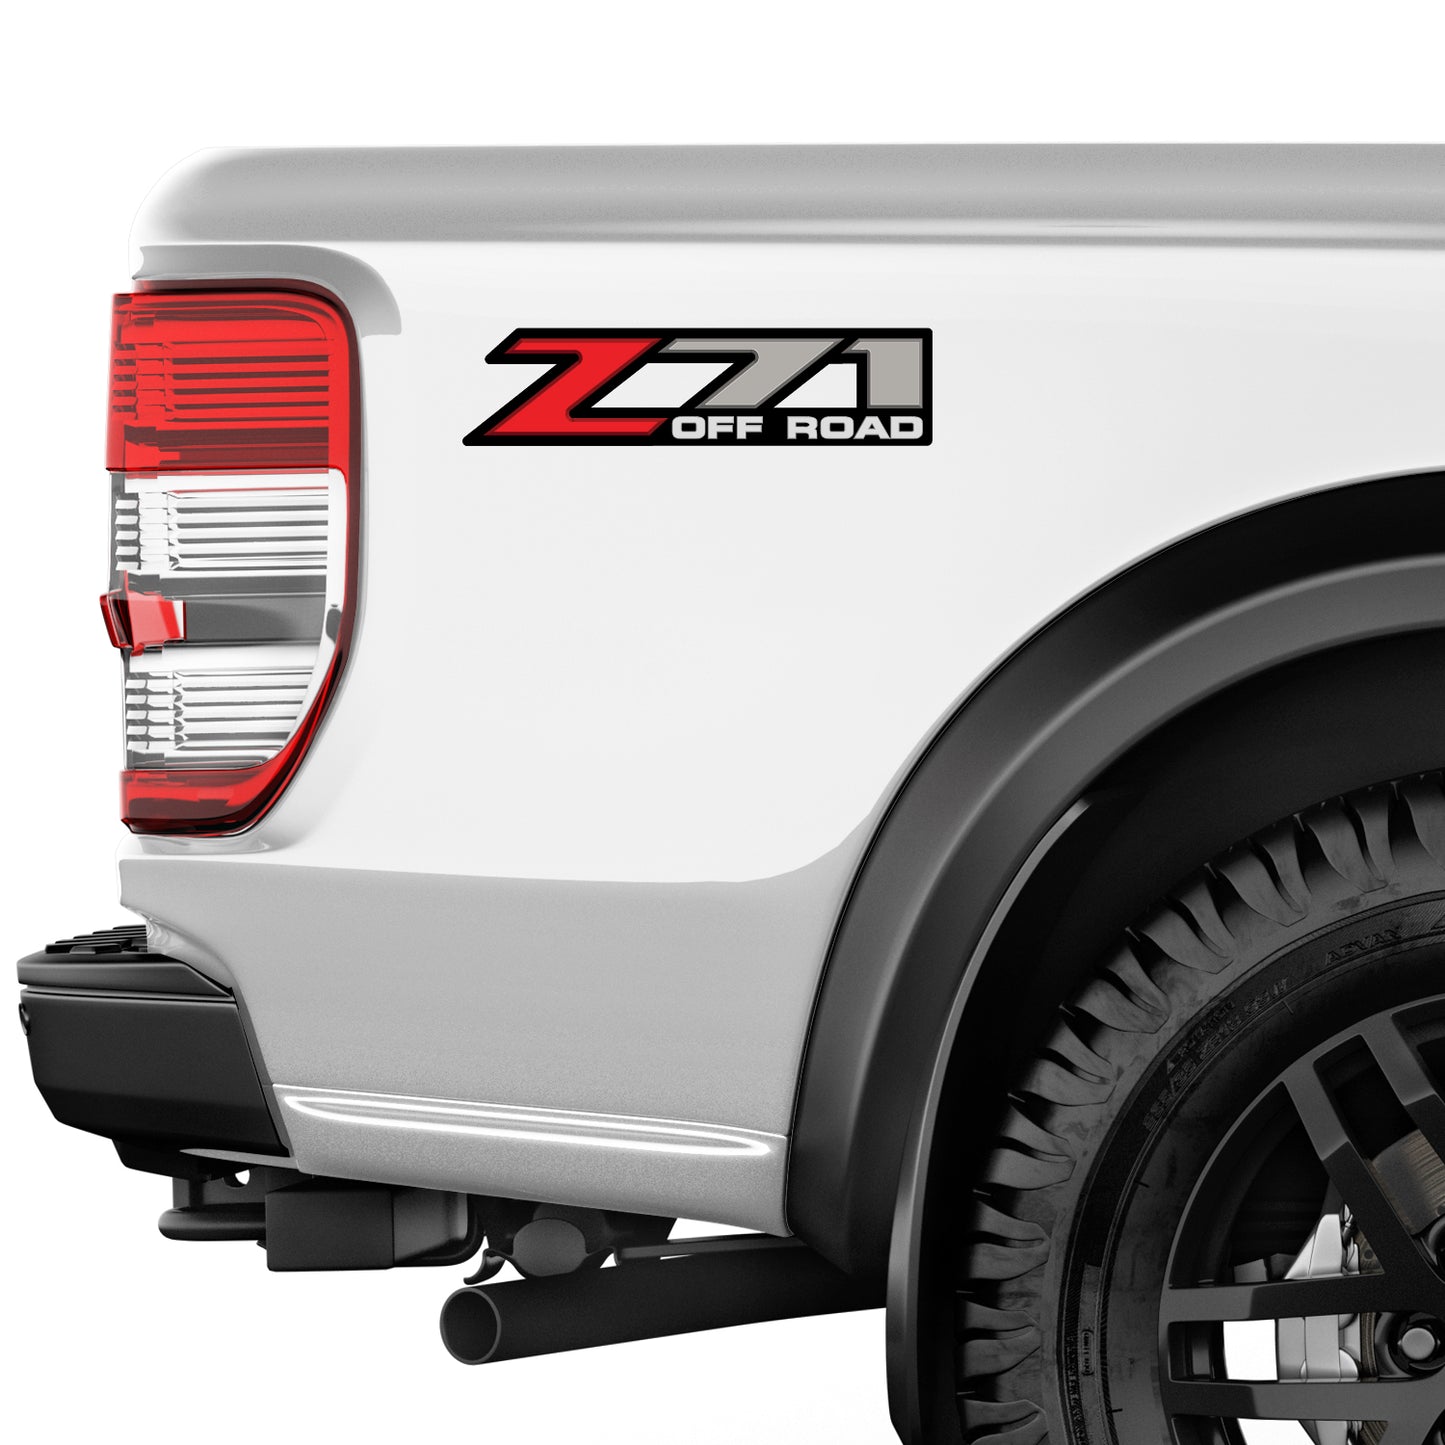 Z71 Offroad Decals Stickers for Chevy Silverado Z71 2001-2006 Bed Side 1500 2500 HD 01-06